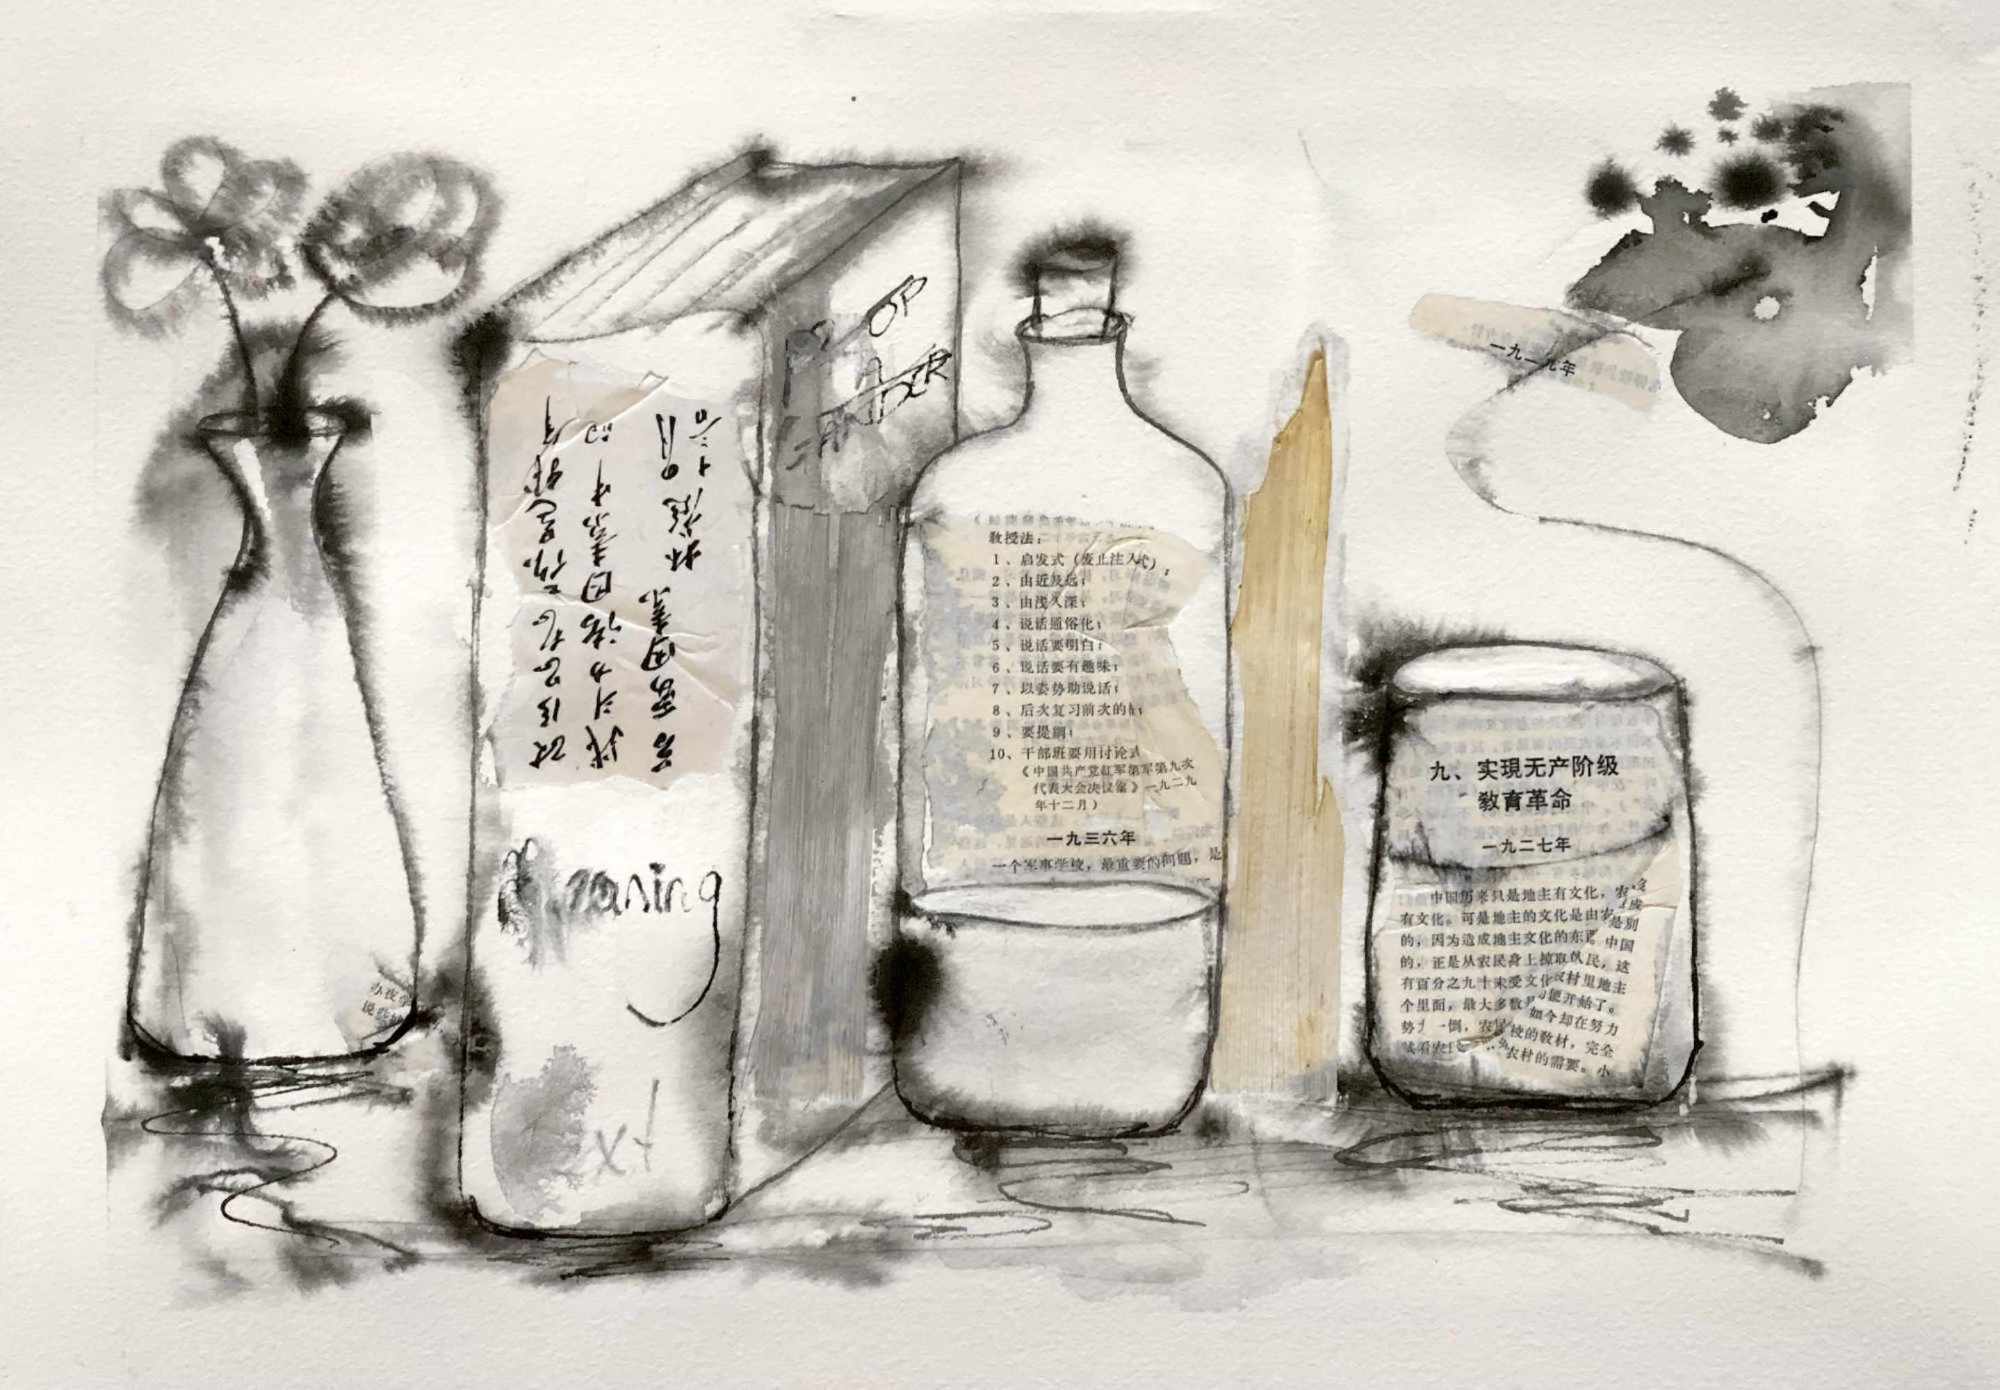 Chinese Medicine - Ink & Mixed Media on Arches - 300 x 210mm